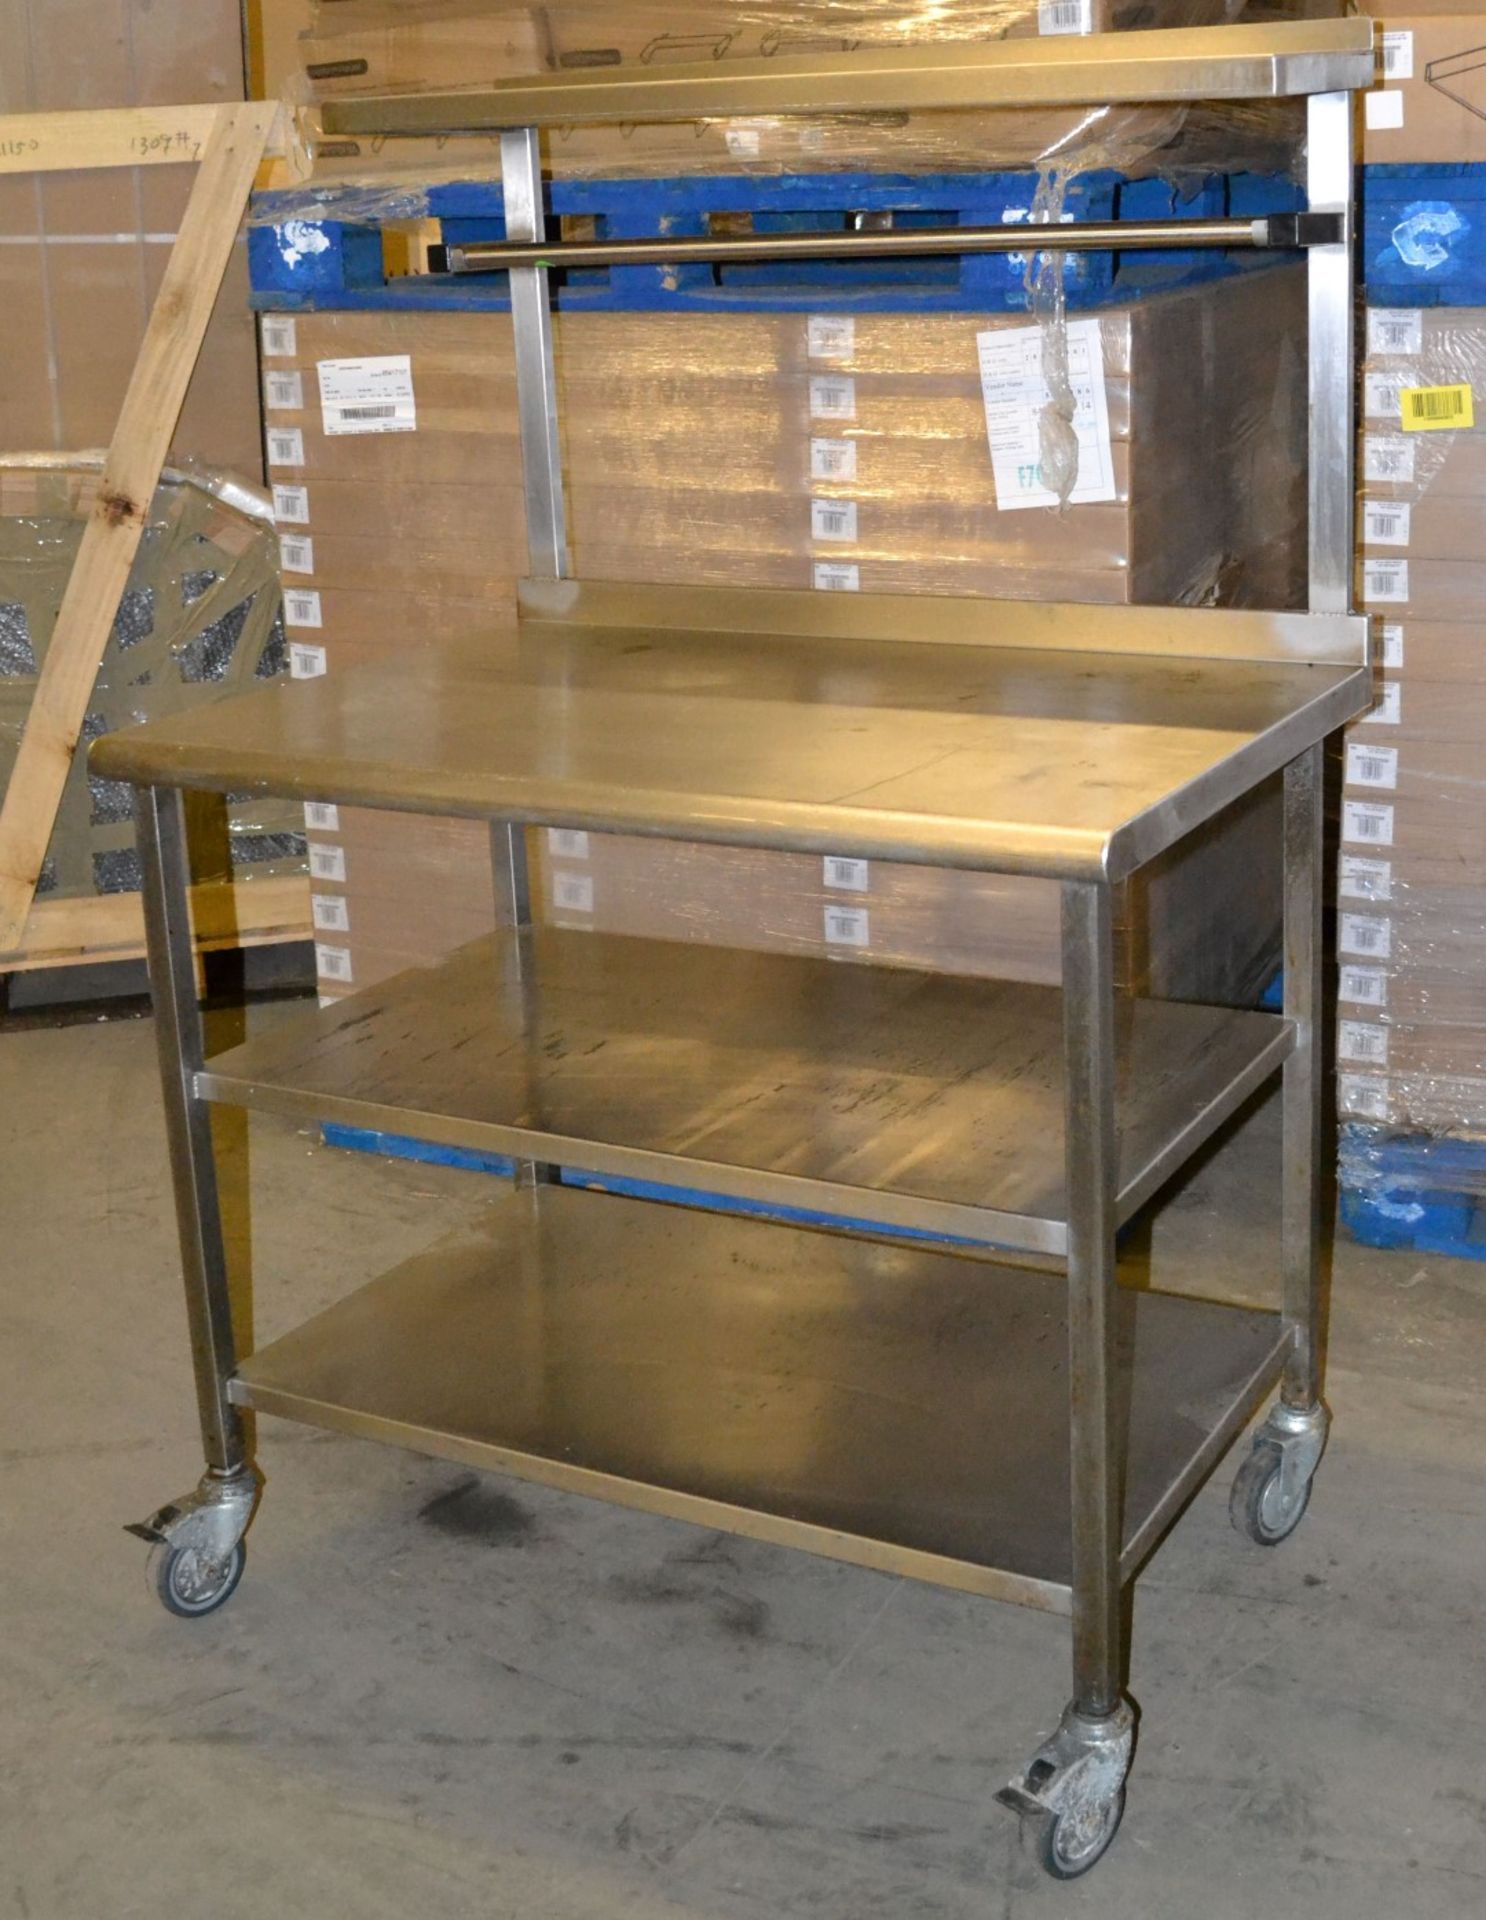 1 x Wheeled Stainless Steel Prep Table - Dimensions: 100 x 69.5 x 148cm - Ref: MC120 - CL282 - Locat - Image 6 of 11